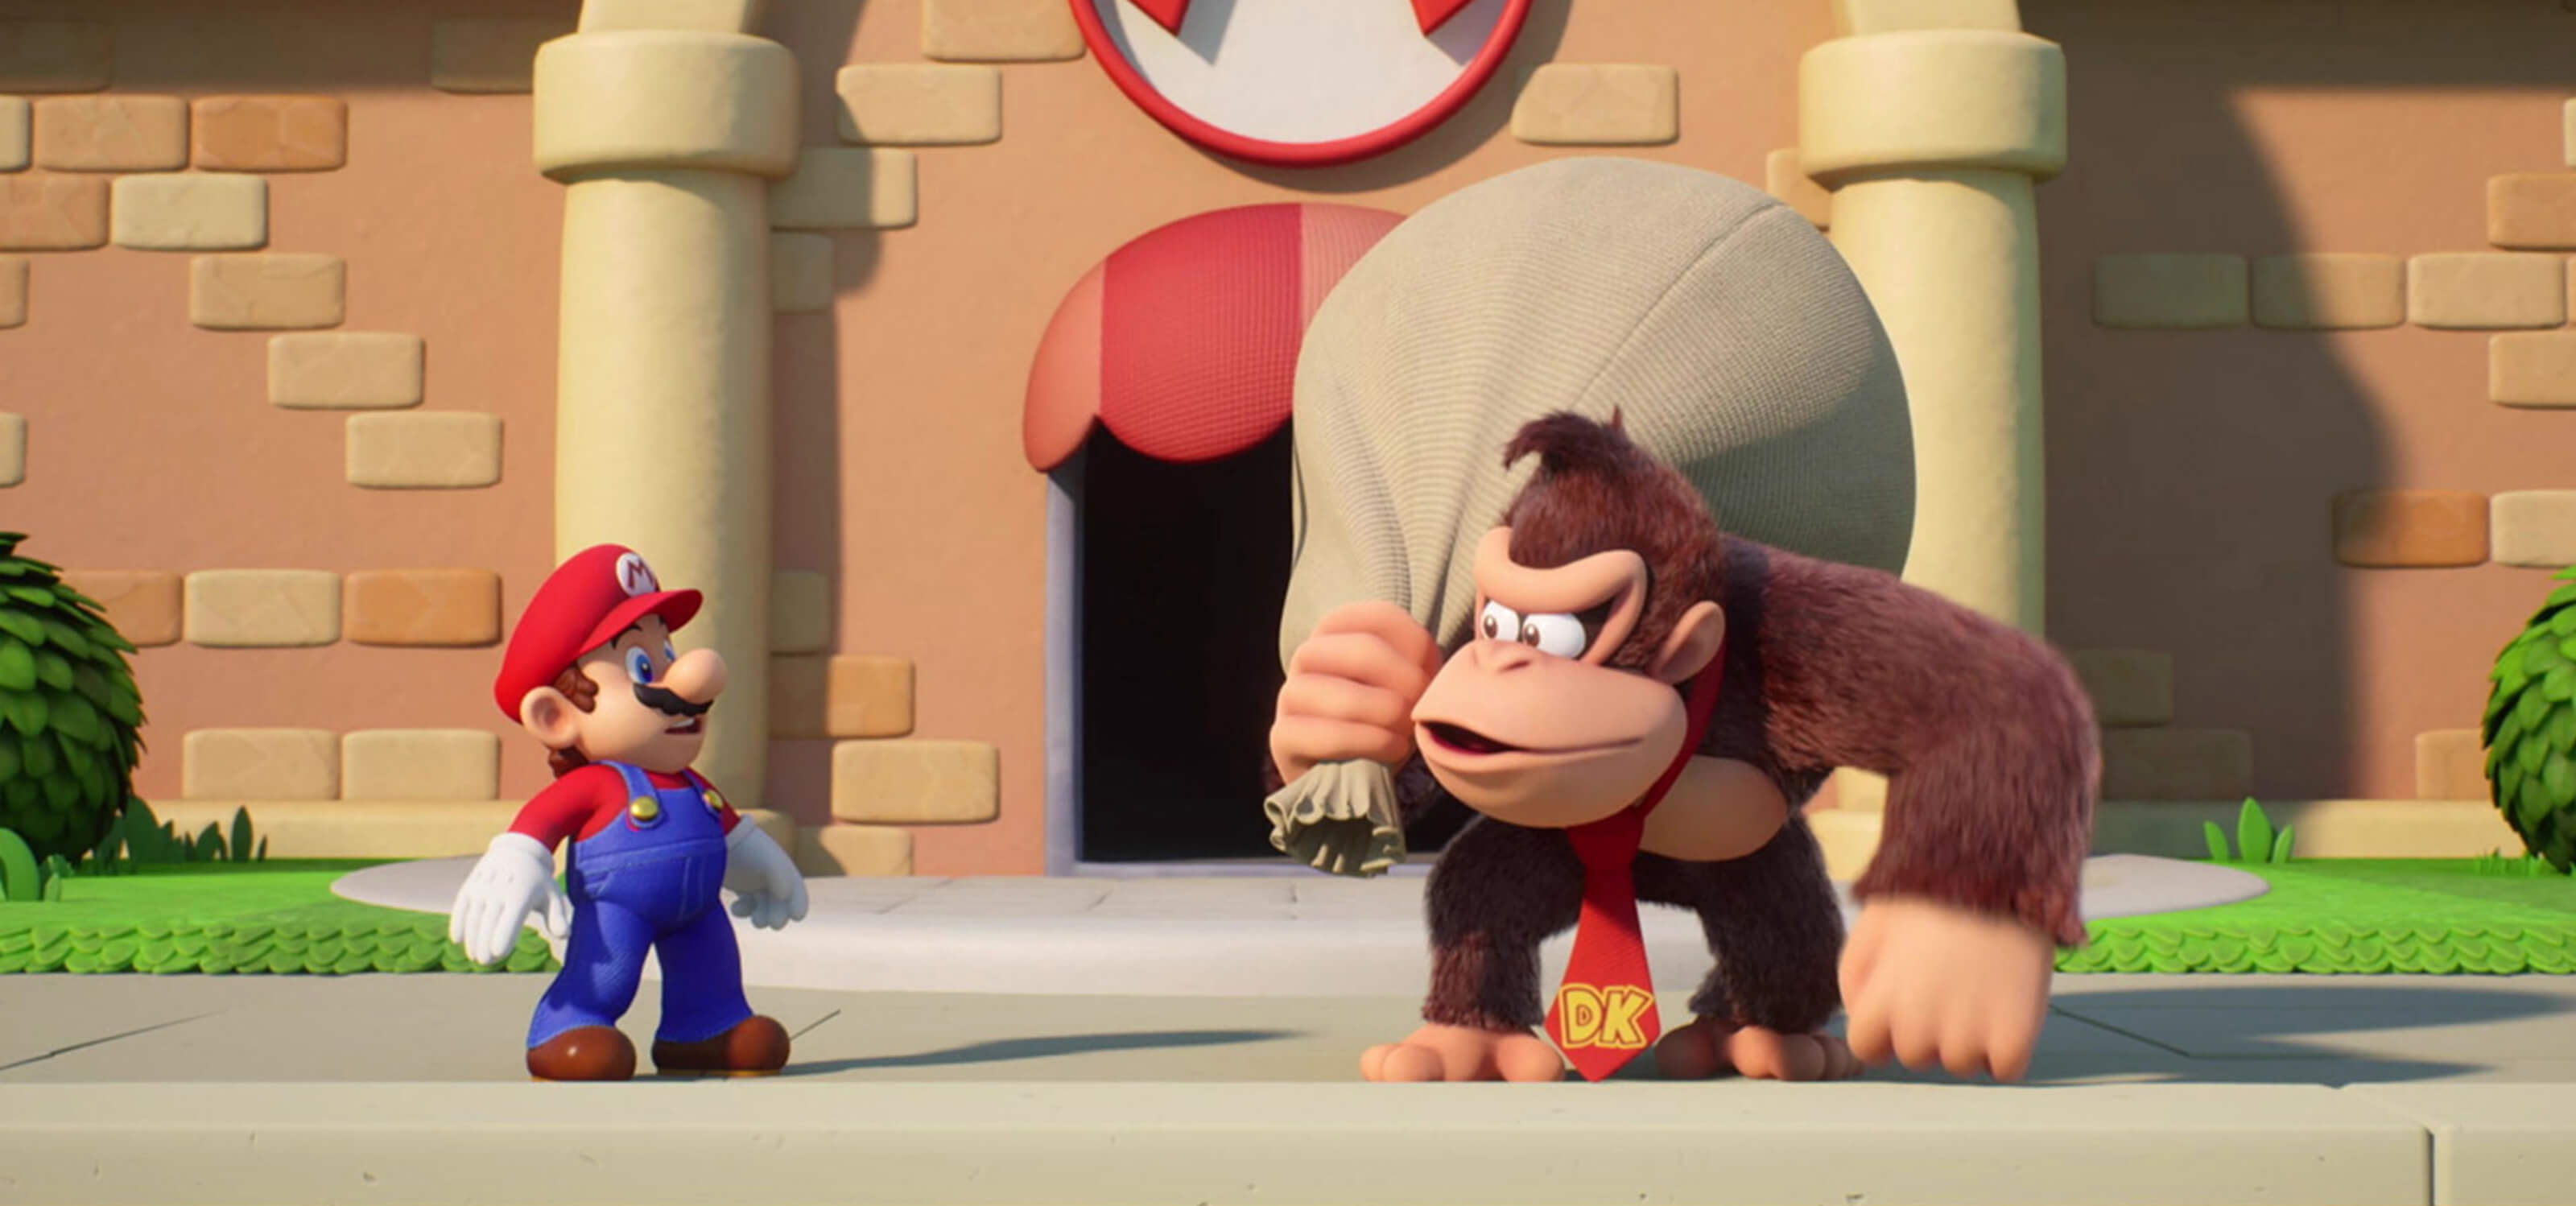 Mario vs. Donkey Kong: new details (new content and features), trailer,  footage, and screenshots - Perfectly Nintendo